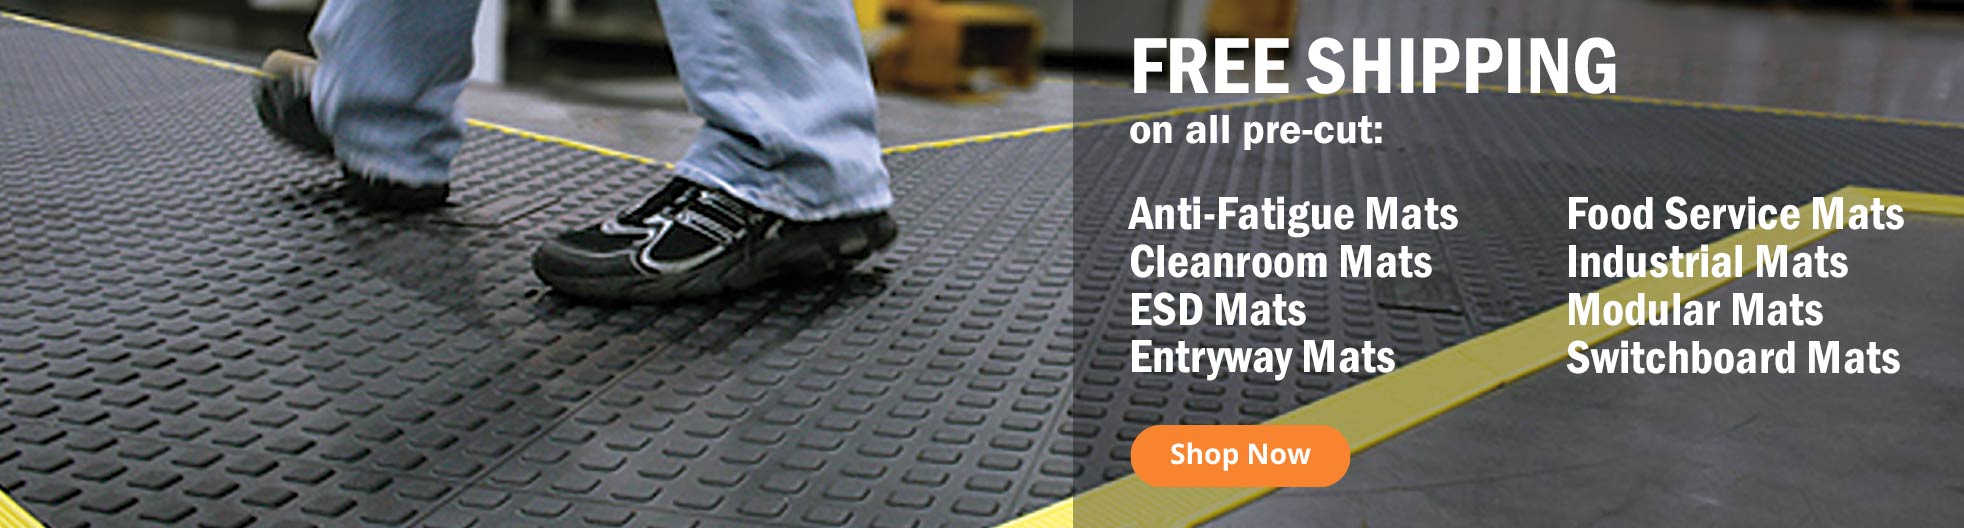 Free Shipping on all Anti-Fatigue & Floor Mat orders over $100